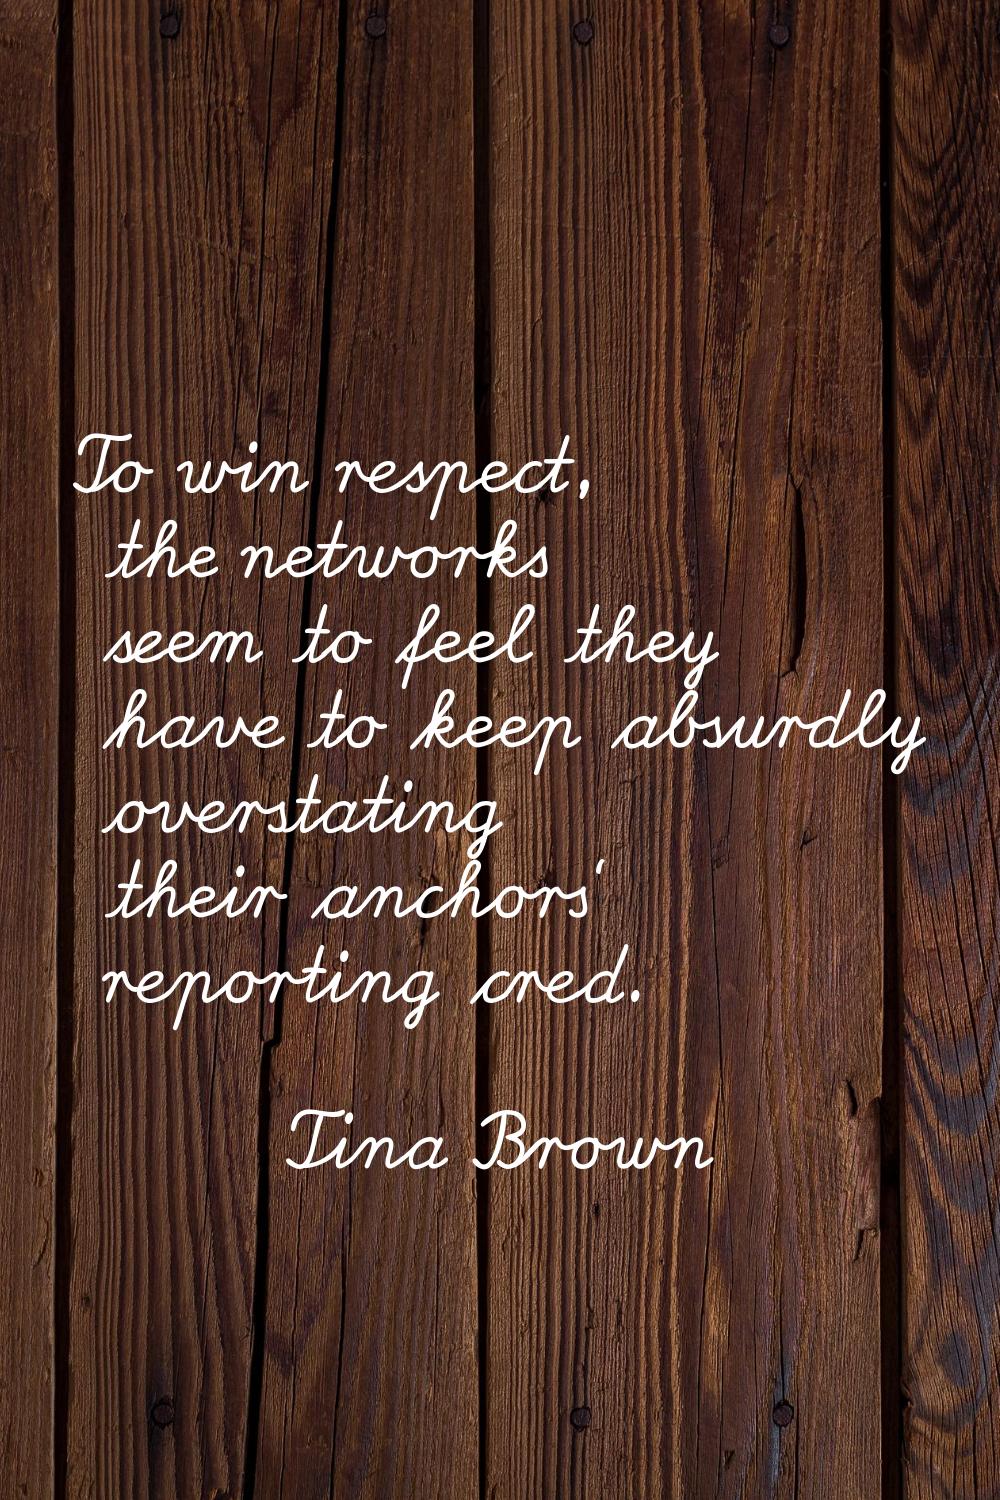 To win respect, the networks seem to feel they have to keep absurdly overstating their anchors' rep